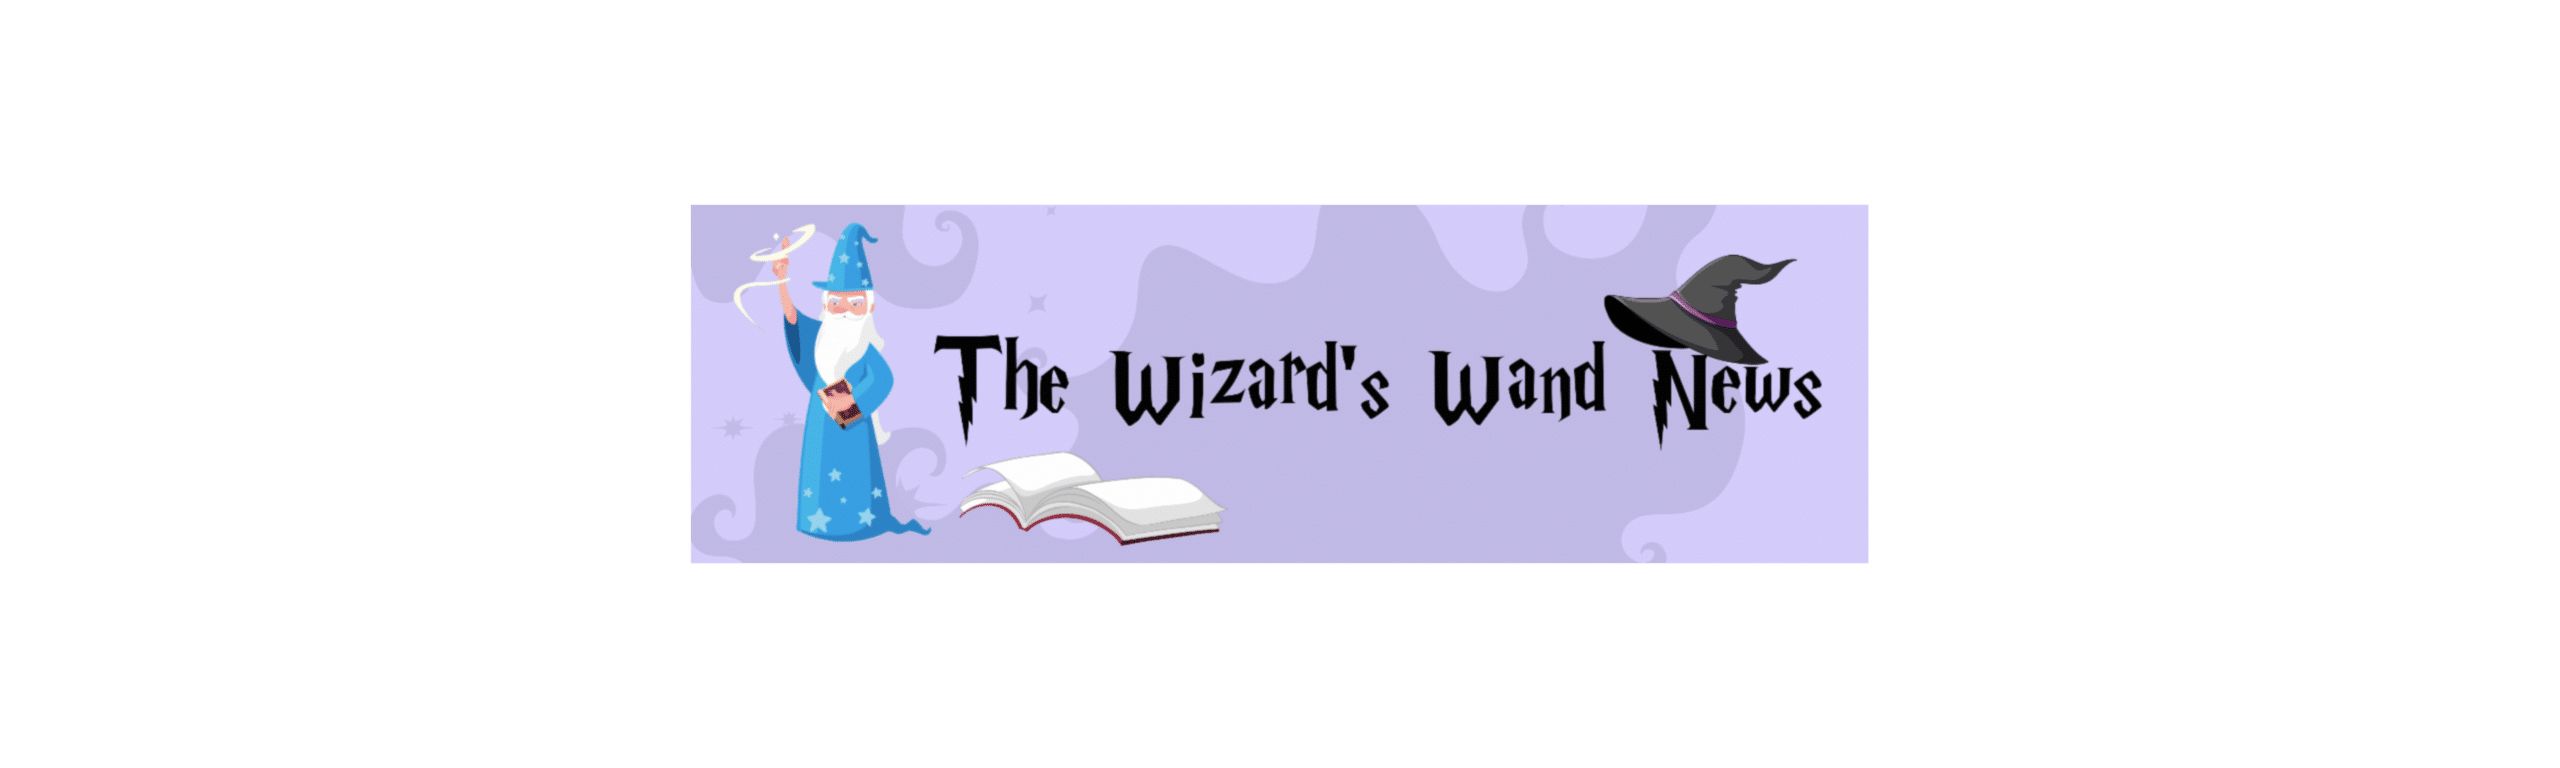 the wizards wand news